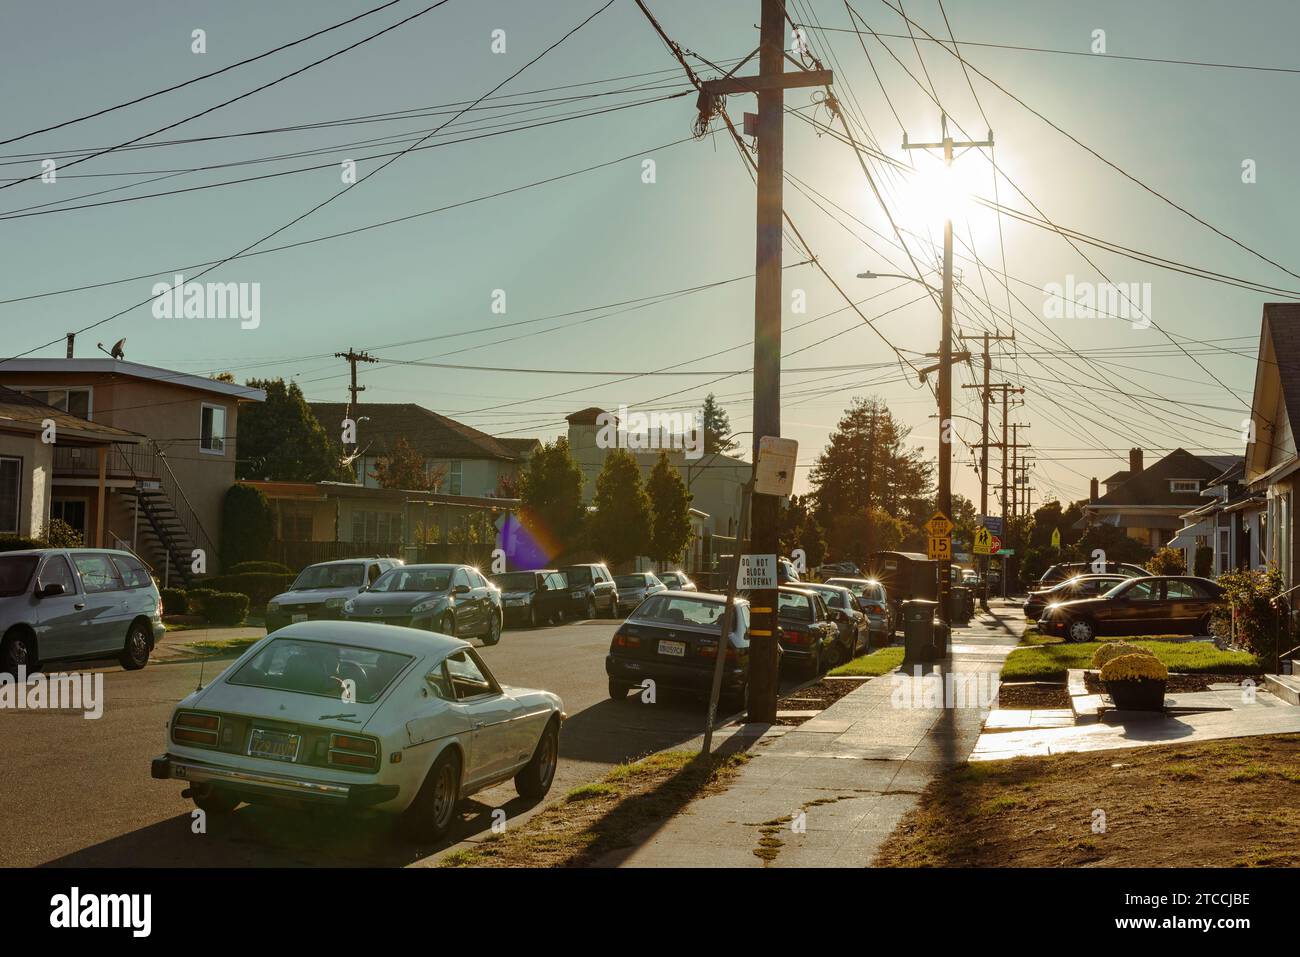 The residential streets of Oakland, San Francisco with overhead power lines and telephone cables Stock Photo